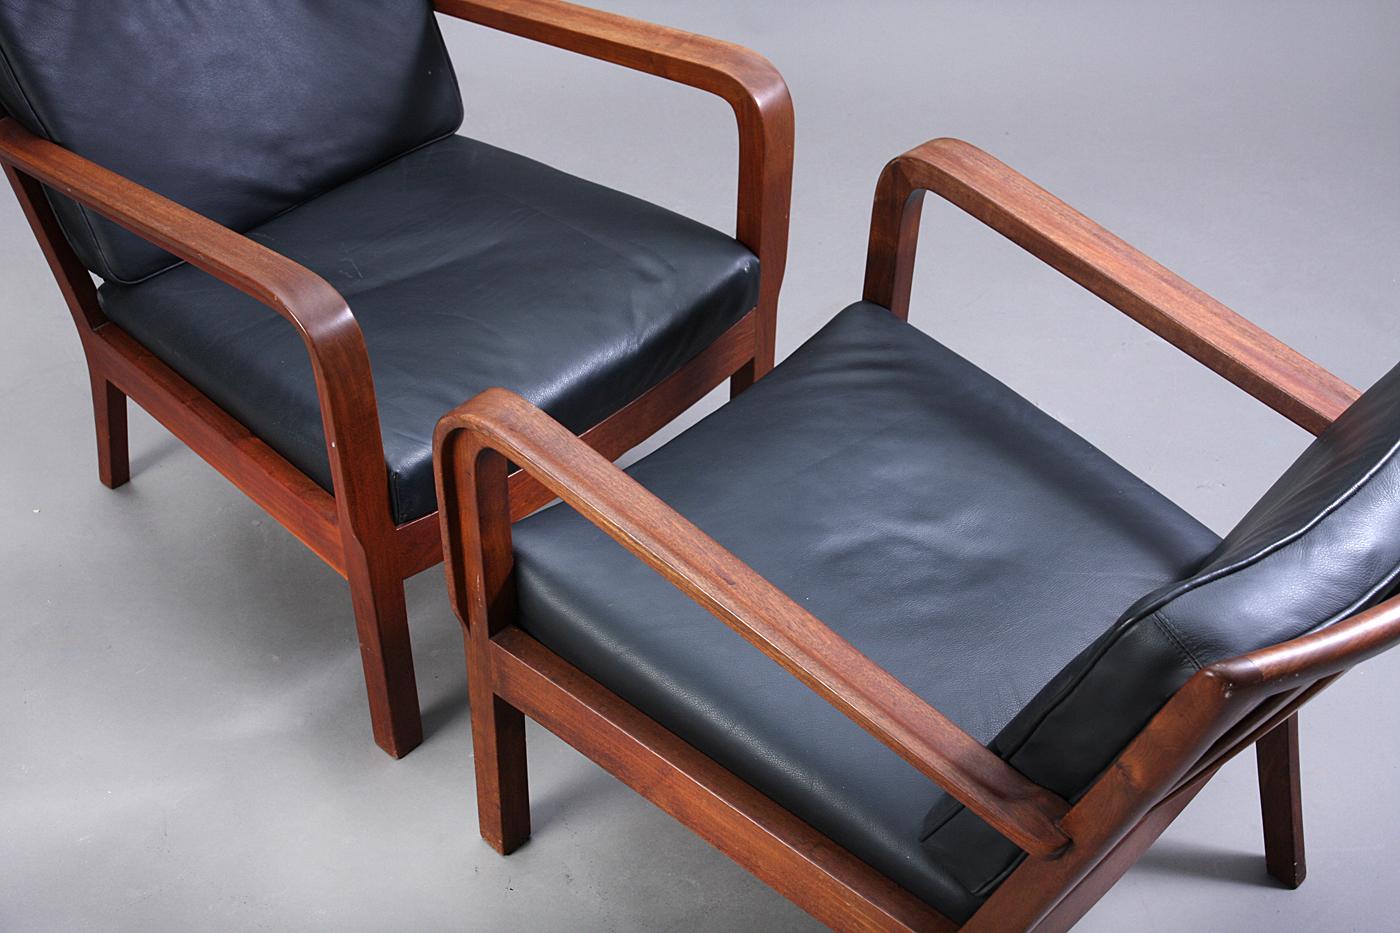 Pair of Vilhelm Lauritzen Low Armchairs in Cuba Mahogany, 1928-1930 In Good Condition For Sale In Vejle, DK